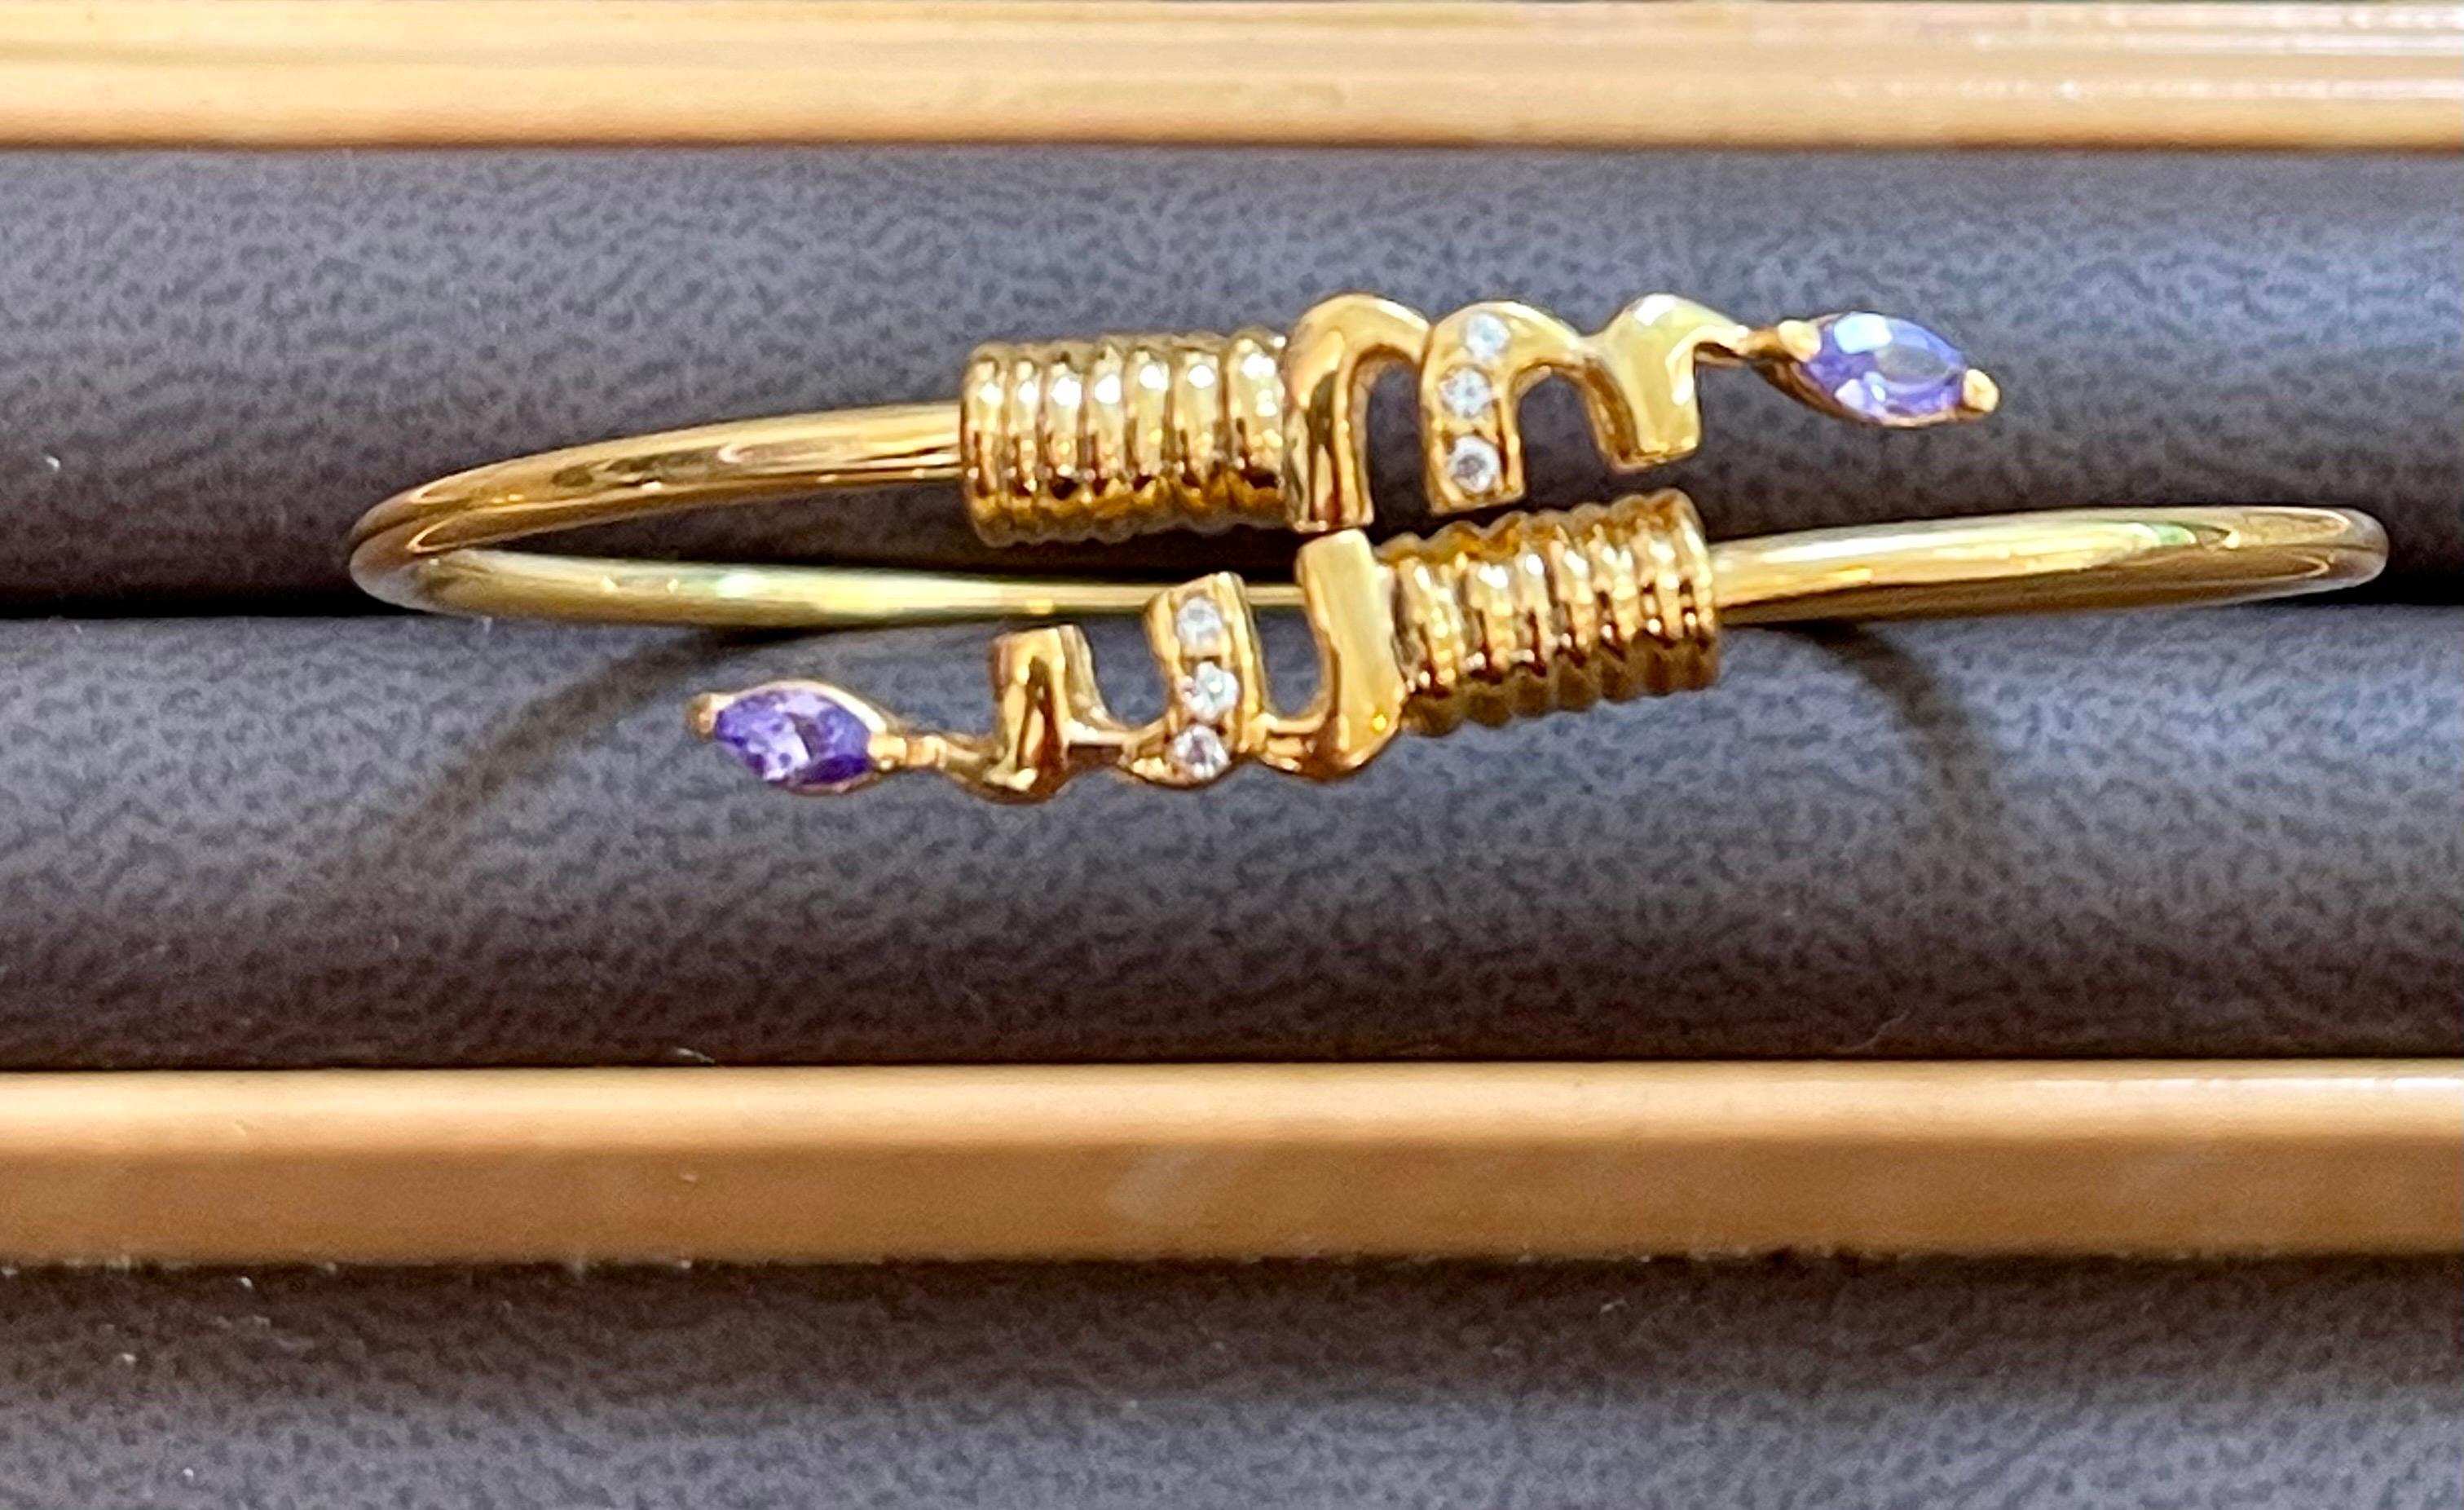 Vintage Cuff Bangle Bracelet 20 Karat Yellow Gold Diamond Tanzanite 8.10 Gram
It features a bangle crafted from an 20 karat  Yellow gold and embedded with  two marquise stones of Amethyst at the ends of the bangle. 
It has some brilliant cut